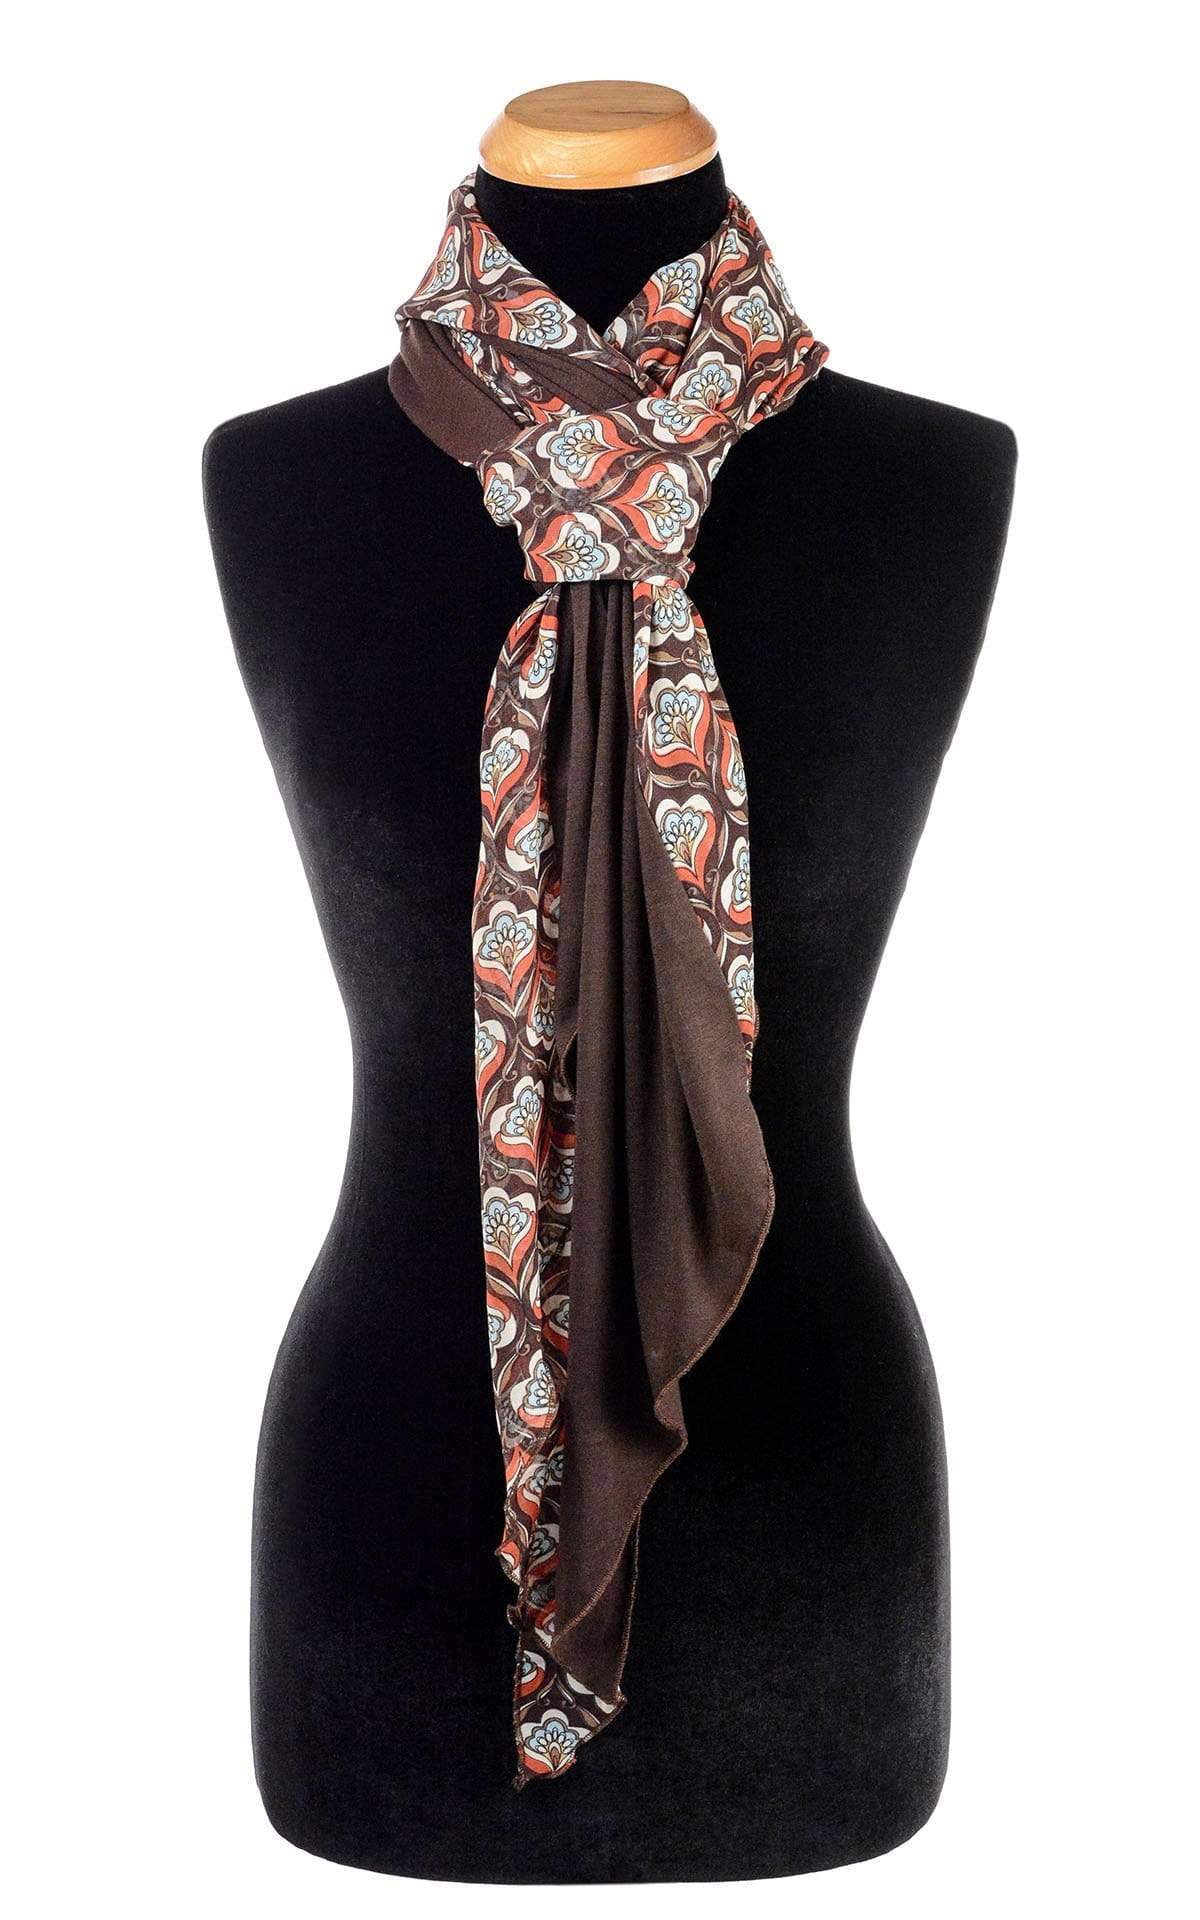  Ladies Two-Tone Handkerchief Scarf, Large Wrap shown tied | Shown in Multi Mod  (brown, blue, rust and cream)   print on Chiffon with Chocolate Jersey Knit | Handmade in Seattle WA | Pandemonium Millinery